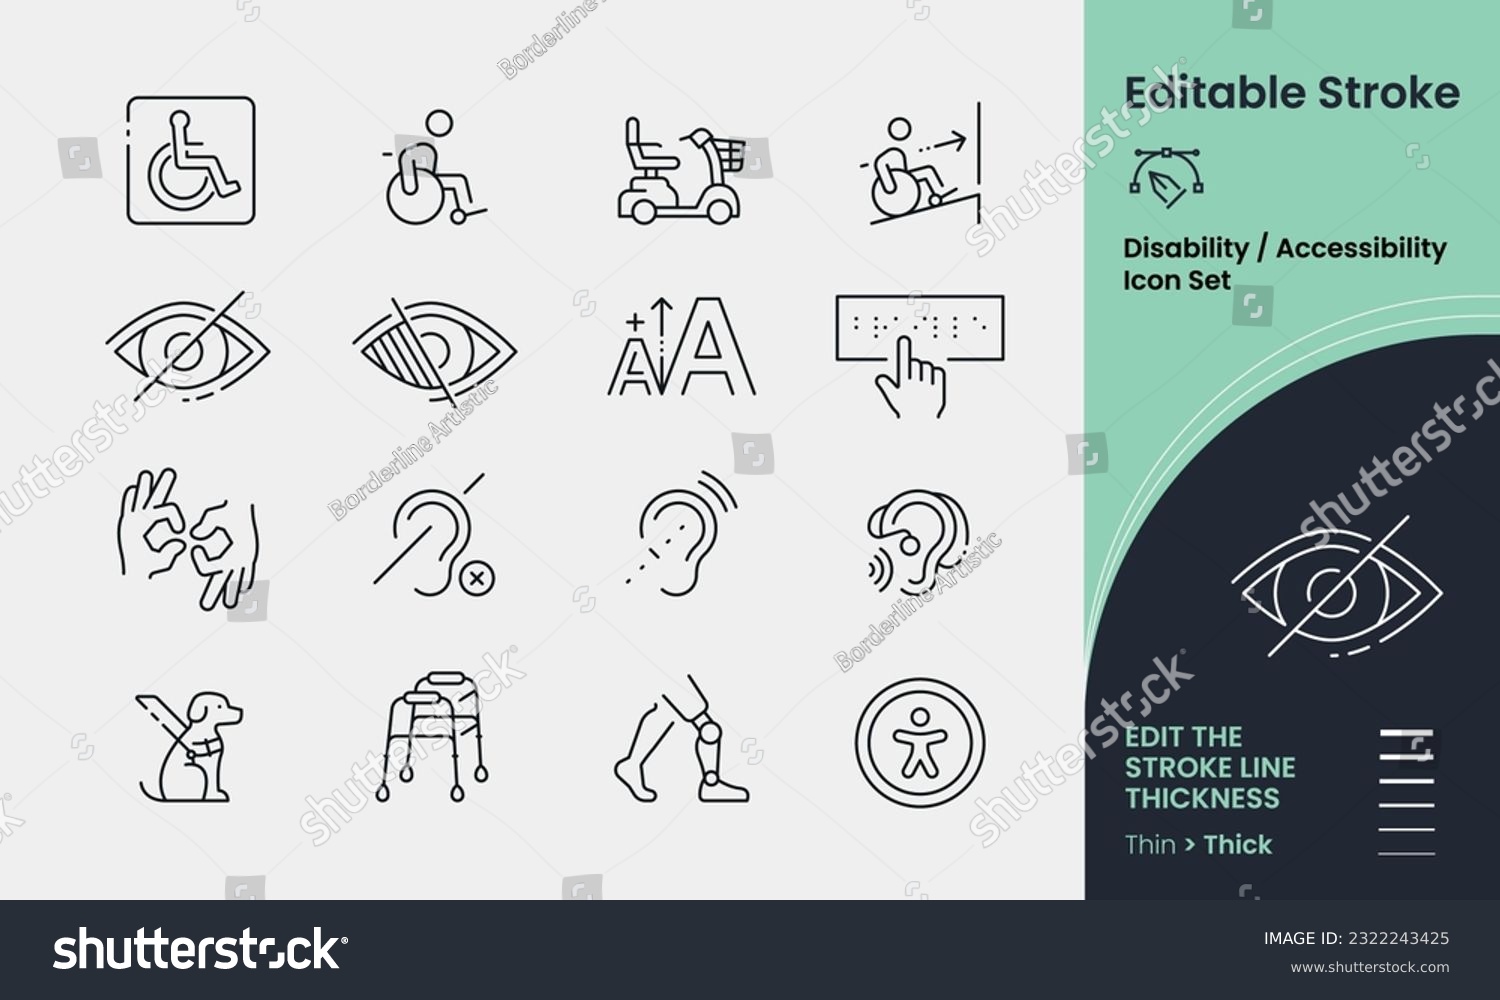 SVG of Disability and Accessibility Icon collection containing 16 editable stroke icons. Perfect for logos, stats and infographics. Edit the thickness of the line in any vector capable app. svg